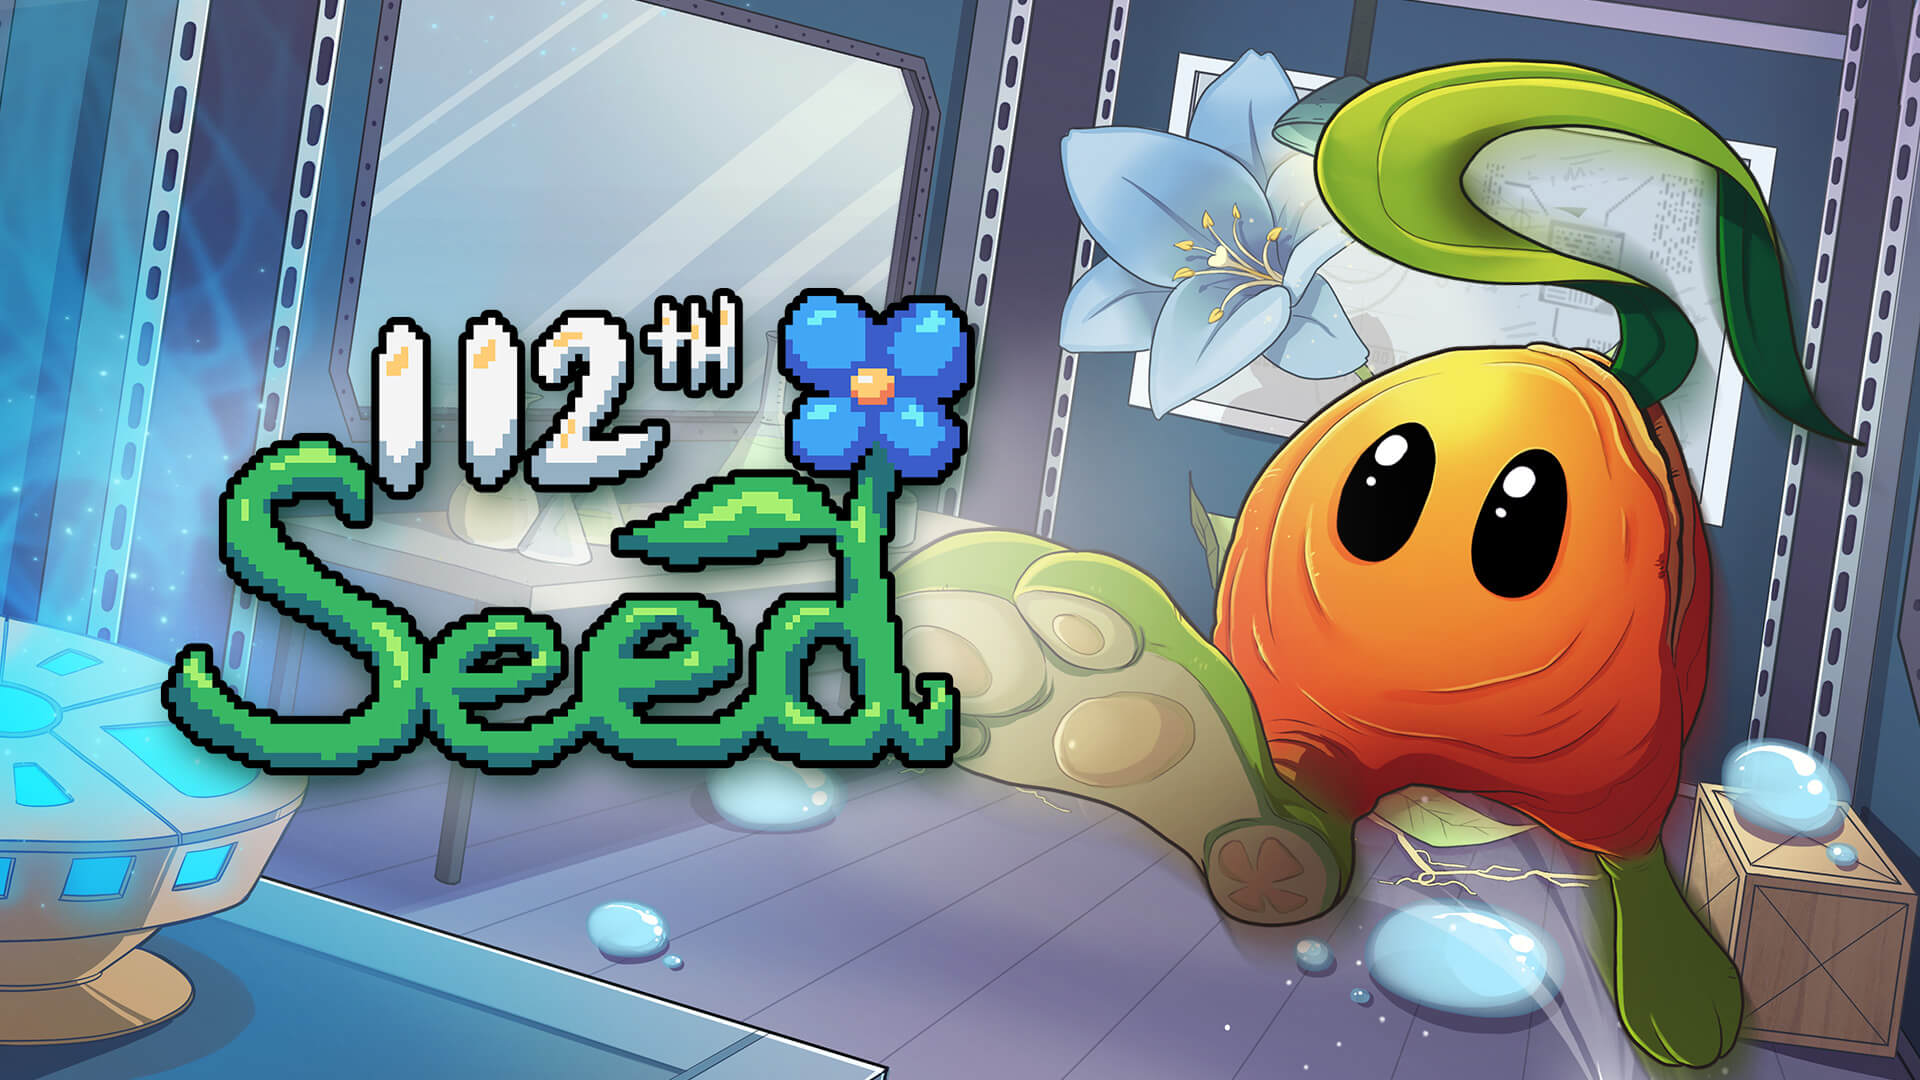 112th Seed Free PC Download